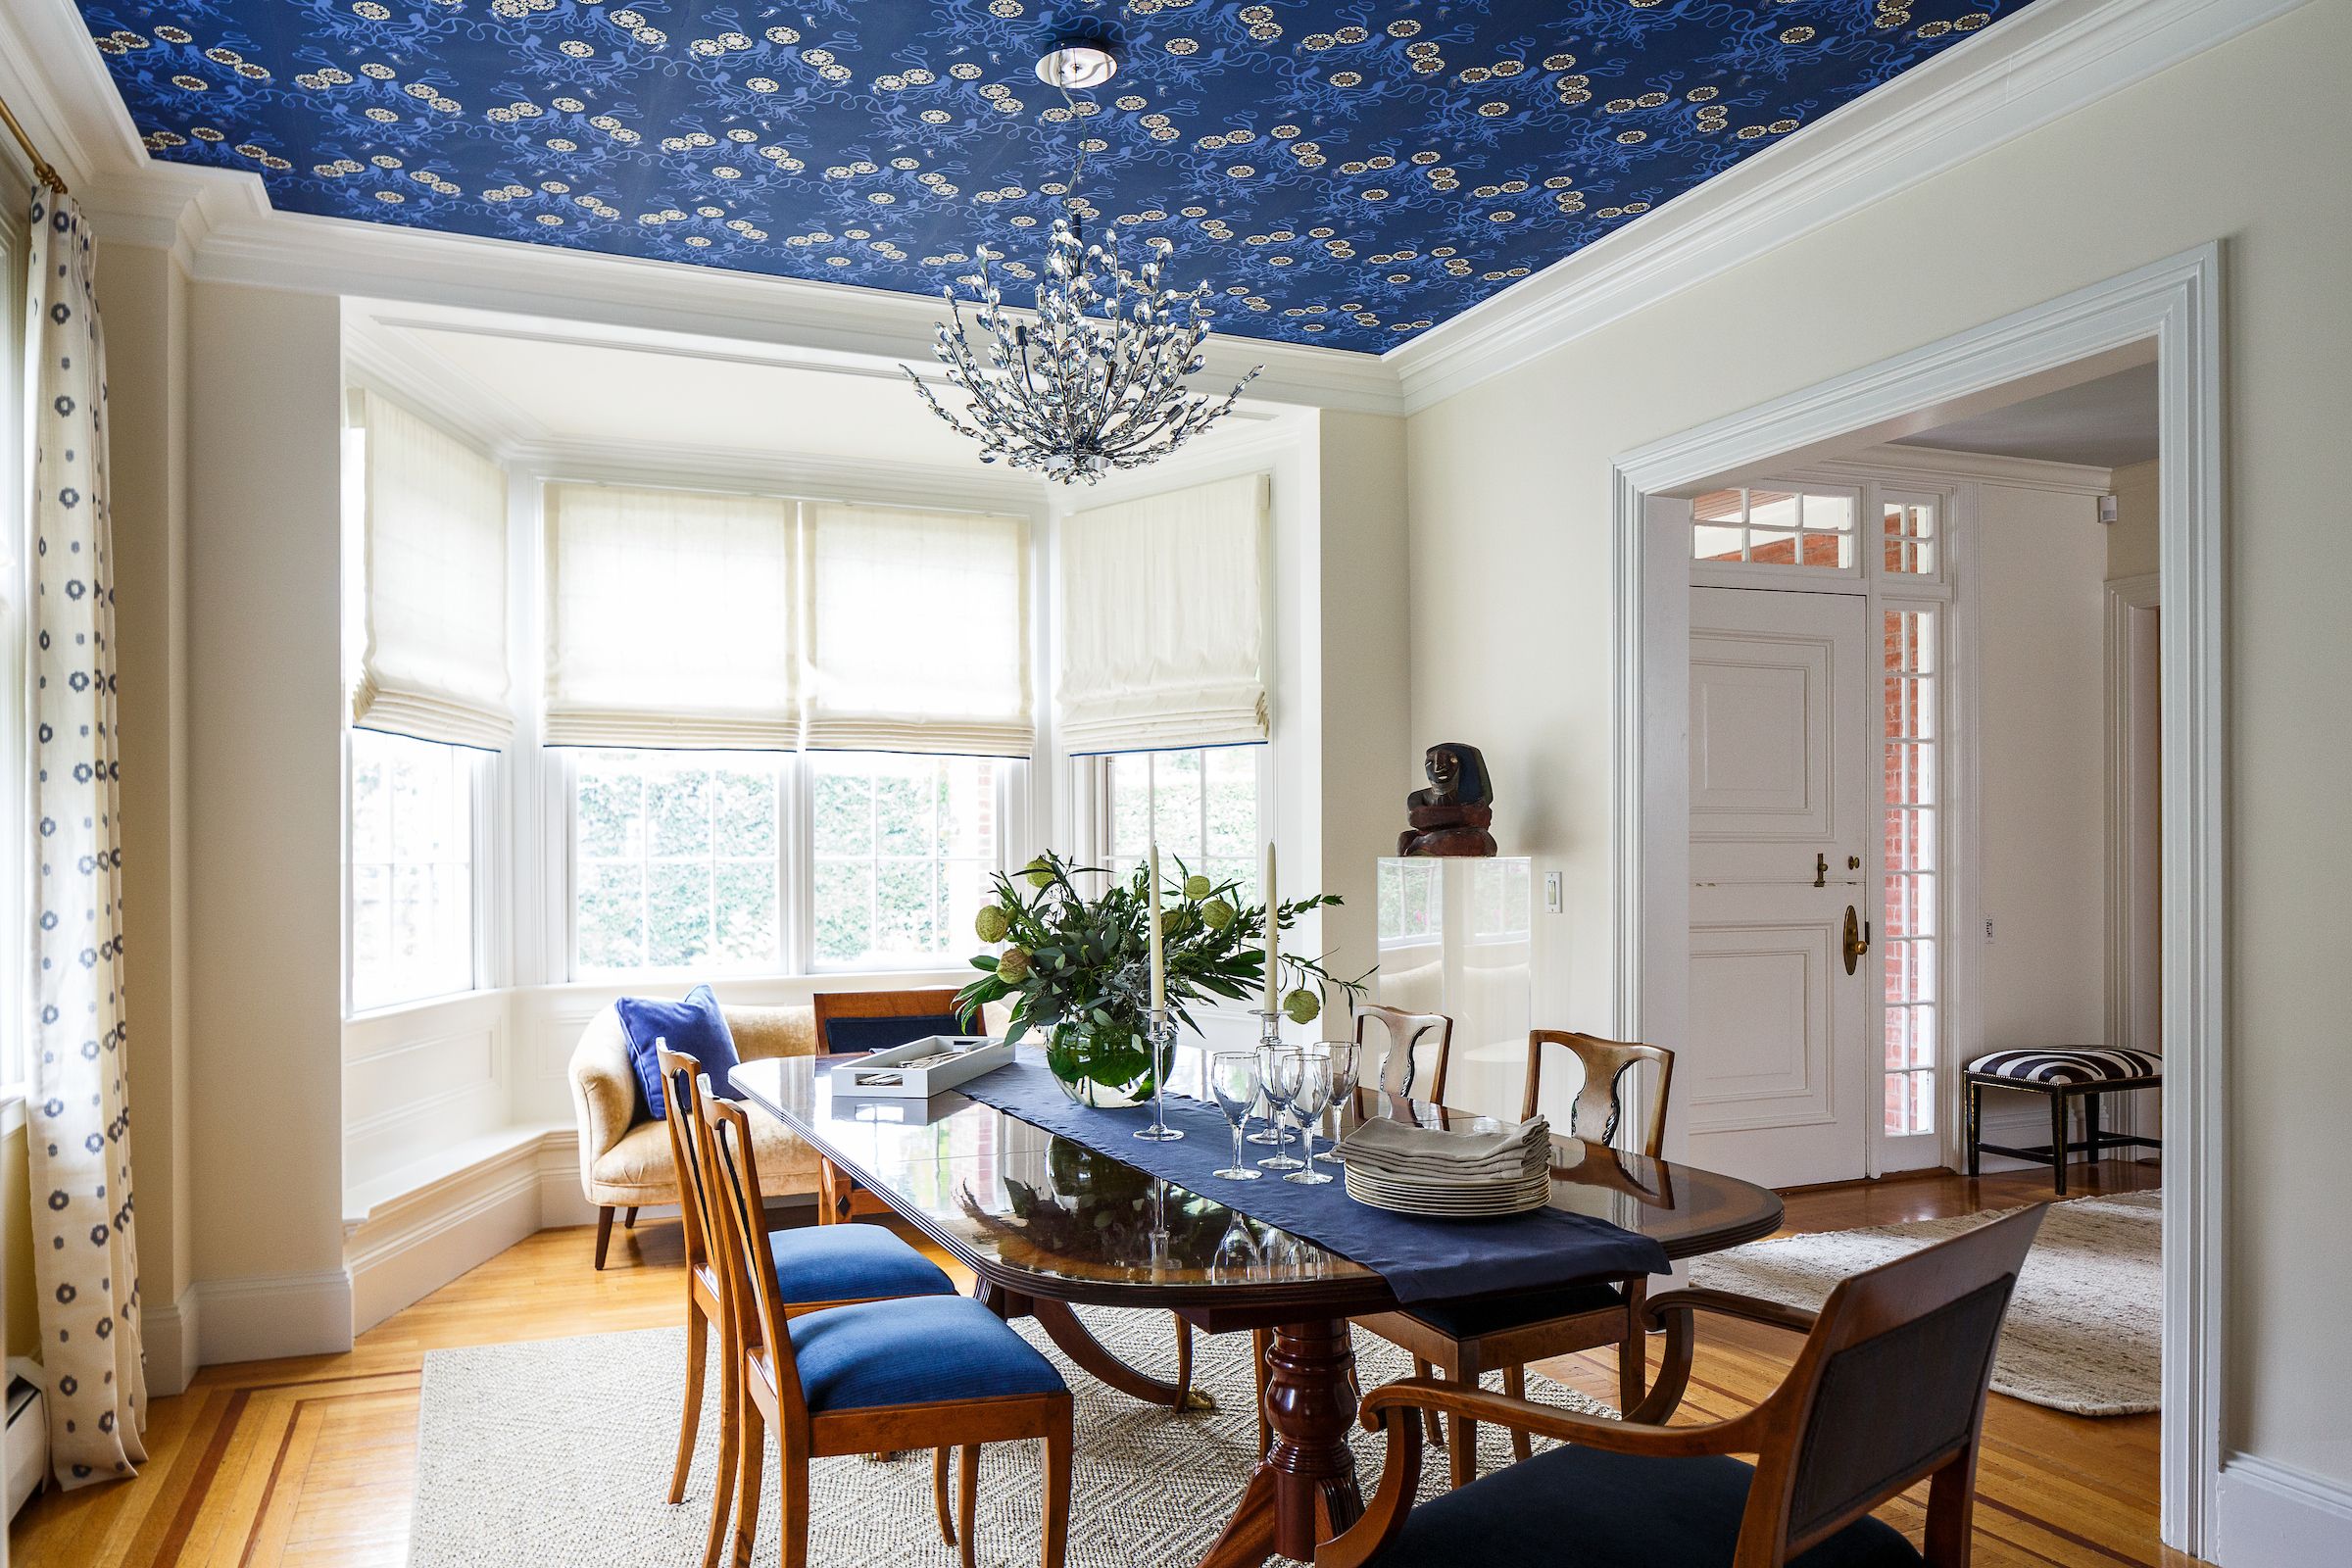 Best Wallpaper Ceiling Ideas Ceilings With Wallpaper